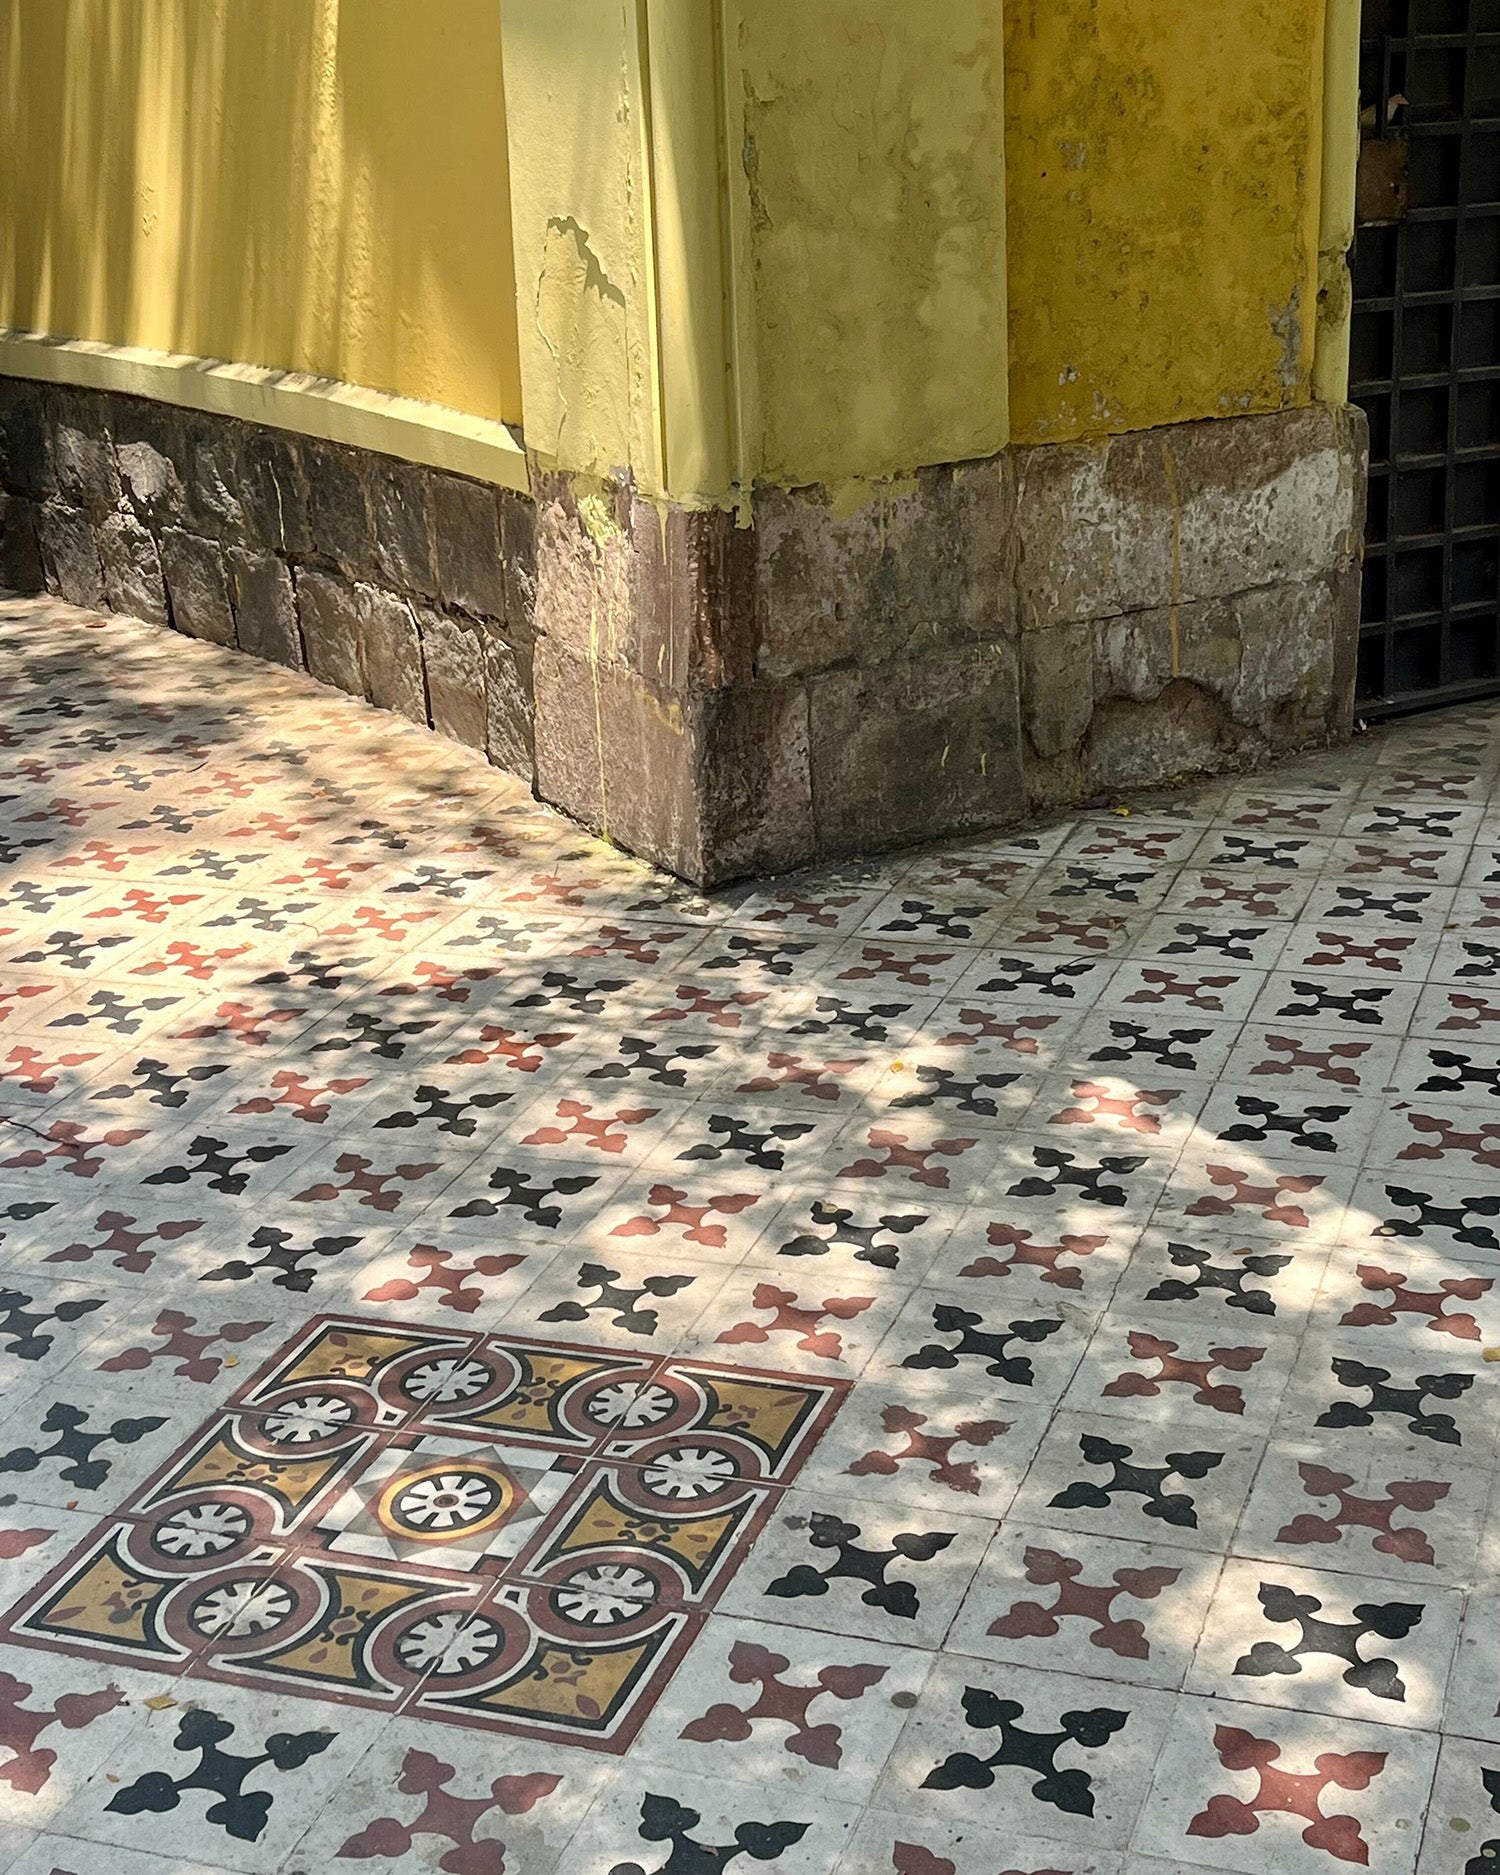 Navy, red, white and gold tiles in Chile.